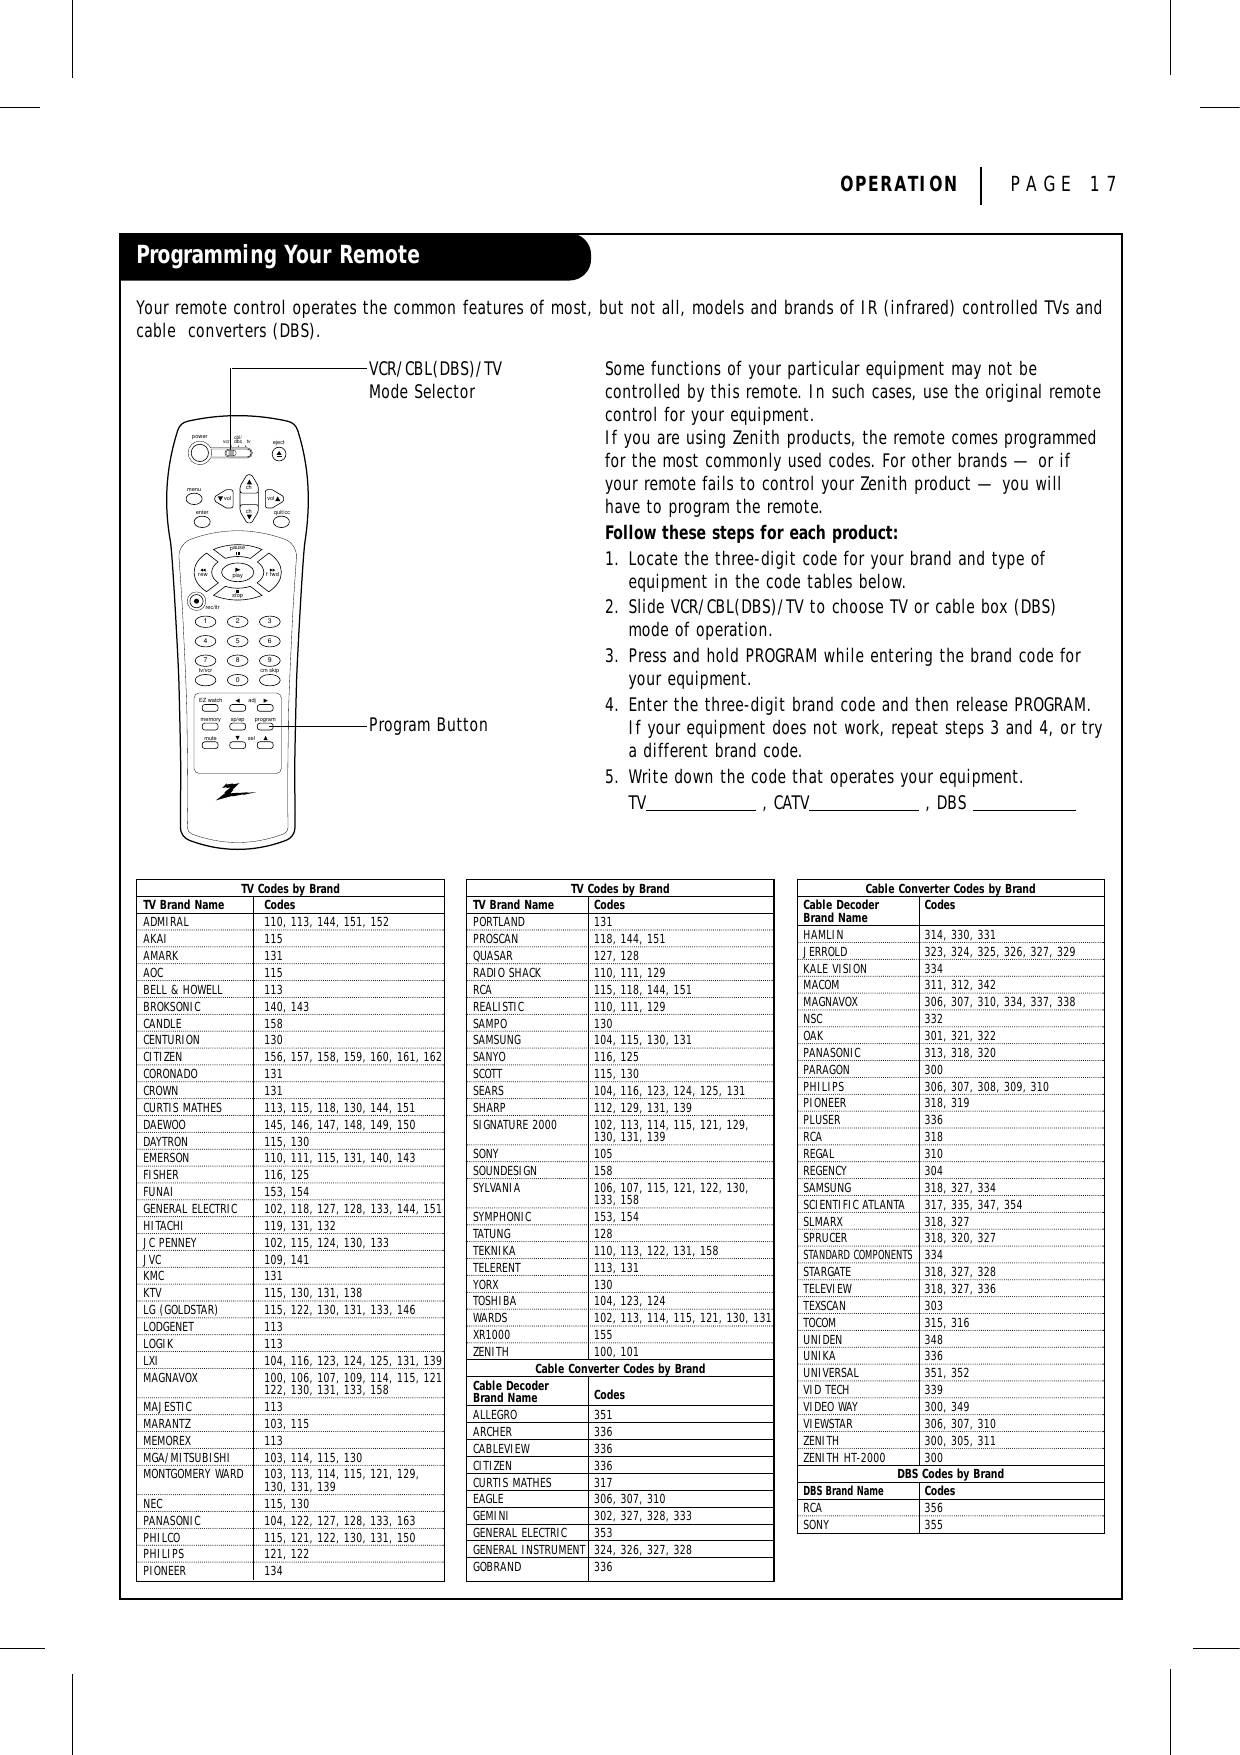 OPERATION  PAGE 17Programming Your RemoteYour remote control operates the common features of most, but not all, models and brands of IR (infrared) controlled TVs andcable  converters (DBS).Some functions of your particular equipment may not be controlled by this remote. In such cases, use the original remotecontrol for your equipment.If you are using Zenith products, the remote comes programmedfor the most commonly used codes. For other brands — or ifyour remote fails to control your Zenith product — you willhave to program the remote.Follow these steps for each product:1. Locate the three-digit code for your brand and type of equipment in the code tables below.2. Slide VCR/CBL(DBS)/TV to choose TV or cable box (DBS)mode of operation.3. Press and hold PROGRAM while entering the brand code foryour equipment.4. Enter the three-digit brand code and then release PROGRAM.If your equipment does not work, repeat steps 3 and 4, or trya different brand code.5. Write down the code that operates your equipment.TV , CATV , DBS vcr cbl/dbs tvpower ejectchchvolvolmenuenter quit/ccrec/itr123456789tv/vcradjEZ watch0cm skipsp/ep programselmemorymutepausestopplayrew f fwdVCR/CBL(DBS)/TVMode SelectorProgram ButtonTV Codes by BrandTV Brand Name CodesADMIRAL 110, 113, 144, 151, 152AKAI 115AMARK 131AOC 115BELL &amp; HOWELL 113BROKSONIC 140, 143CANDLE 158CENTURION 130CITIZEN 156, 157, 158, 159, 160, 161, 162CORONADO 131CROWN 131CURTIS MATHES 113, 115, 118, 130, 144, 151DAEWOO 145, 146, 147, 148, 149, 150DAYTRON 115, 130EMERSON 110, 111, 115, 131, 140, 143FISHER 116, 125FUNAI 153, 154GENERAL ELECTRIC 102, 118, 127, 128, 133, 144, 151HITACHI 119, 131, 132JC PENNEY 102, 115, 124, 130, 133JVC 109, 141KMC 131KTV 115, 130, 131, 138LG (GOLDSTAR) 115, 122, 130, 131, 133, 146LODGENET 113LOGIK 113LXI 104, 116, 123, 124, 125, 131, 139MAGNAVOX 100, 106, 107, 109, 114, 115, 121122, 130, 131, 133, 158MAJESTIC 113MARANTZ 103, 115MEMOREX 113MGA/MITSUBISHI 103, 114, 115, 130MONTGOMERY WARD 103, 113, 114, 115, 121, 129, 130, 131, 139NEC 115, 130PANASONIC 104, 122, 127, 128, 133, 163PHILCO 115, 121, 122, 130, 131, 150PHILIPS 121, 122PIONEER 134TV Codes by BrandTV Brand Name CodesPORTLAND 131PROSCAN 118, 144, 151QUASAR 127, 128RADIO SHACK 110, 111, 129RCA 115, 118, 144, 151REALISTIC 110, 111, 129SAMPO 130SAMSUNG 104, 115, 130, 131SANYO 116, 125SCOTT 115, 130SEARS 104, 116, 123, 124, 125, 131SHARP 112, 129, 131, 139SIGNATURE 2000 102, 113, 114, 115, 121, 129, 130, 131, 139SONY 105SOUNDESIGN 158SYLVANIA 106, 107, 115, 121, 122, 130, 133, 158SYMPHONIC 153, 154 TATUNG 128TEKNIKA 110, 113, 122, 131, 158TELERENT 113, 131YORX 130TOSHIBA 104, 123, 124WARDS 102, 113, 114, 115, 121, 130, 131XR1000 155ZENITH 100, 101Cable Converter Codes by BrandCable Decoder CodesBrand Name ALLEGRO 351ARCHER 336CABLEVIEW 336CITIZEN 336CURTIS MATHES 317EAGLE 306, 307, 310GEMINI 302, 327, 328, 333GENERAL ELECTRIC 353GENERAL INSTRUMENT 324, 326, 327, 328GOBRAND 336Cable Converter Codes by BrandCable Decoder CodesBrand Name HAMLIN 314, 330, 331JERROLD 323, 324, 325, 326, 327, 329KALE VISION 334MACOM 311, 312, 342MAGNAVOX 306, 307, 310, 334, 337, 338NSC 332OAK 301, 321, 322PANASONIC 313, 318, 320PARAGON 300PHILIPS 306, 307, 308, 309, 310PIONEER 318, 319PLUSER 336RCA 318REGAL 310REGENCY 304SAMSUNG 318, 327, 334SCIENTIFIC ATLANTA 317, 335, 347, 354SLMARX 318, 327SPRUCER 318, 320, 327STANDARD COMPONENTS334STARGATE 318, 327, 328TELEVIEW 318, 327, 336TEXSCAN 303TOCOM 315, 316UNIDEN 348UNIKA 336UNIVERSAL 351, 352VID TECH 339VIDEO WAY 300, 349VIEWSTAR 306, 307, 310ZENITH 300, 305, 311ZENITH HT-2000 300DBS Codes by BrandDBS Brand NameCodesRCA 356SONY 355